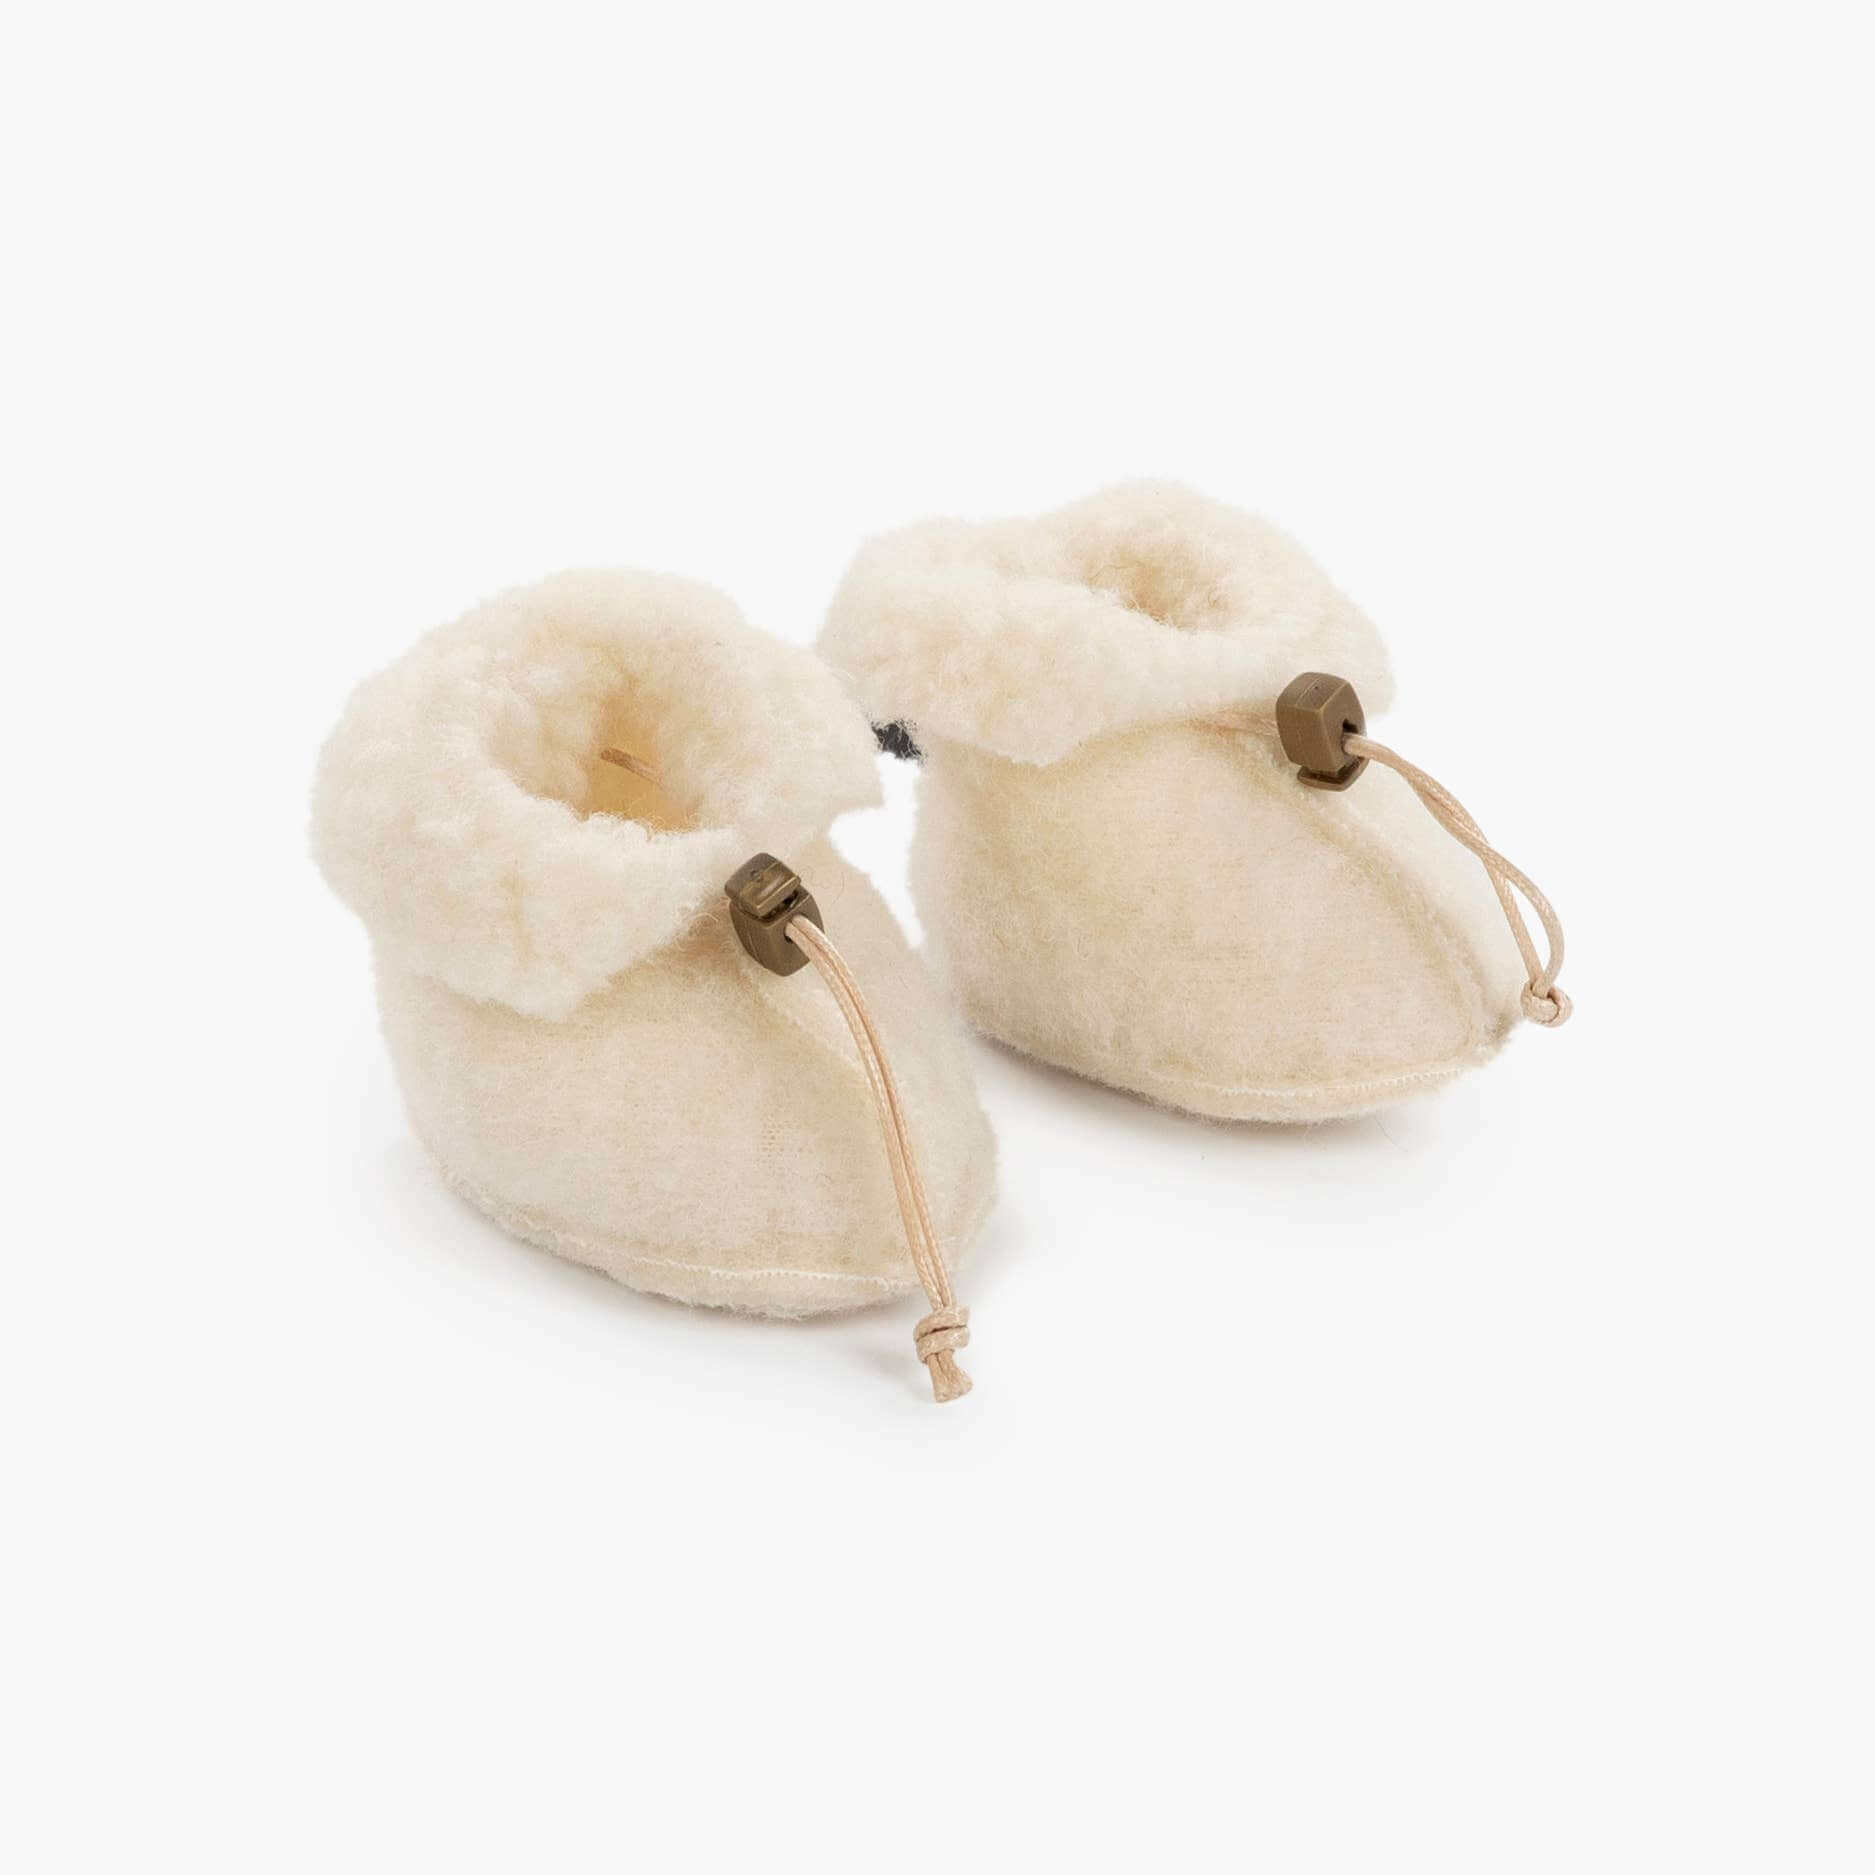 Baby shoes made from 100% wool - Natural